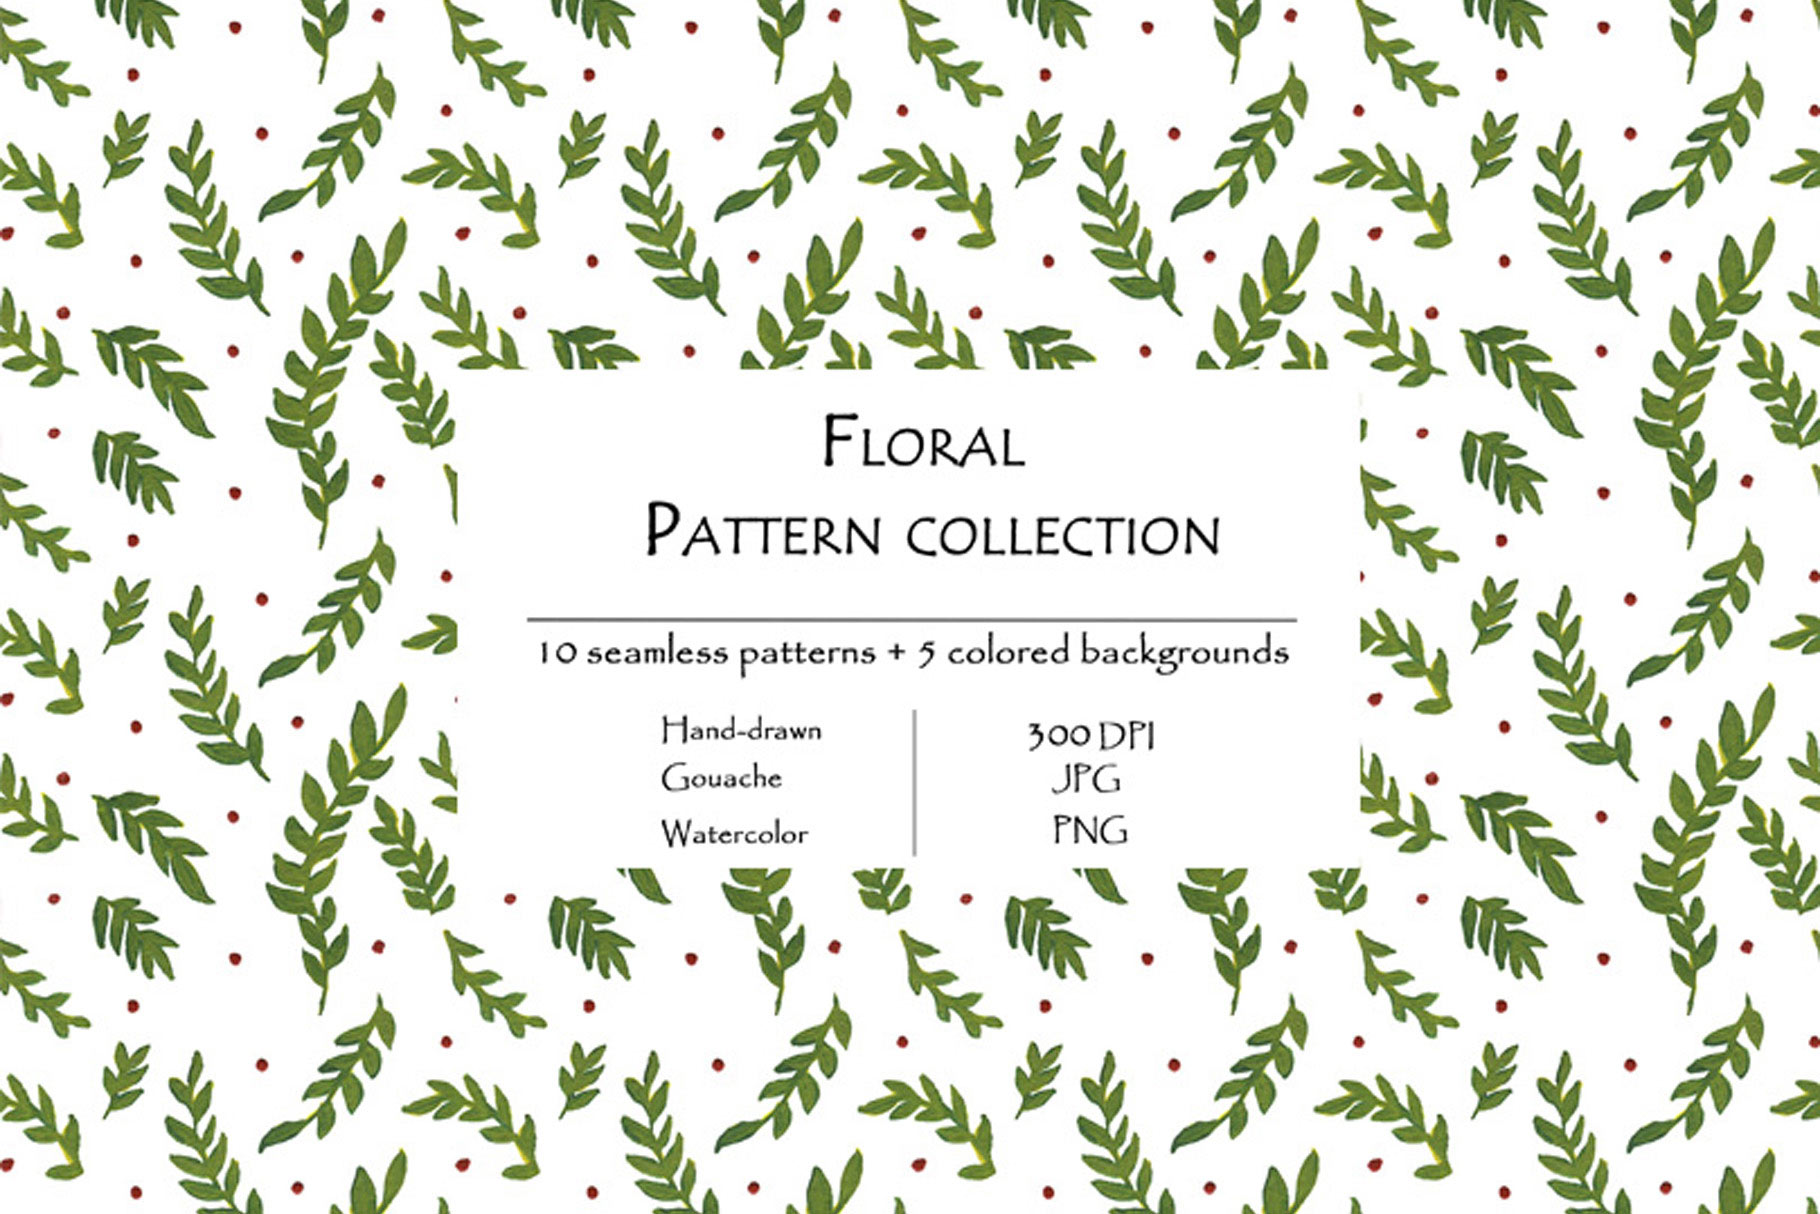 Floral Pattern Collection Of 10 Seamless Patterns And 5 Colored Backgrounds Green Style.